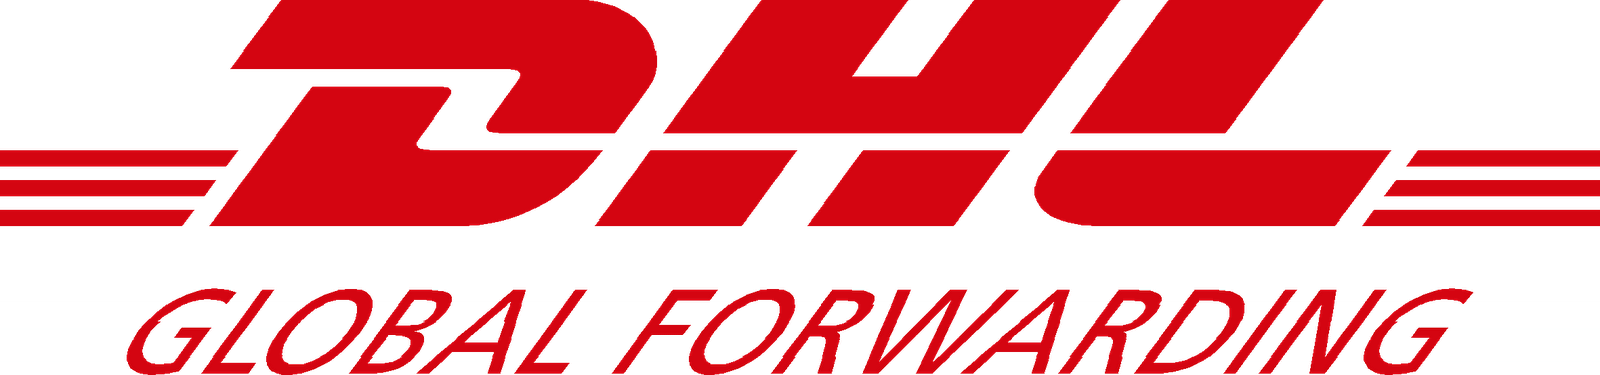 DHL Global Forwarding Logo - DHL invests US$9 million to grow Global Forwarding business in ...